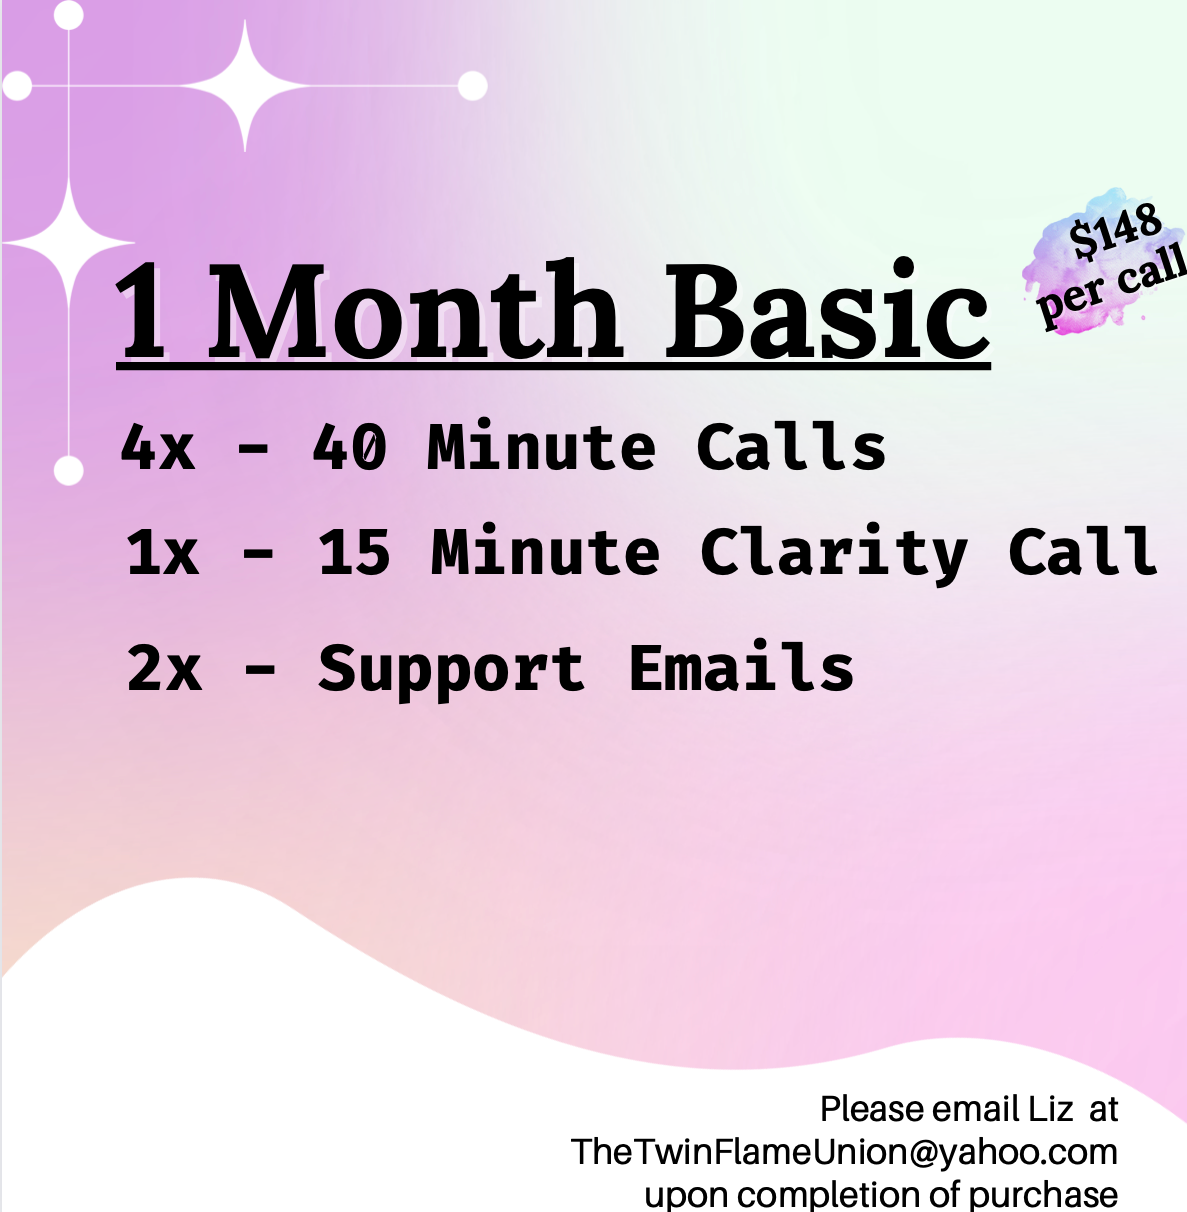 1 Month Basic Package